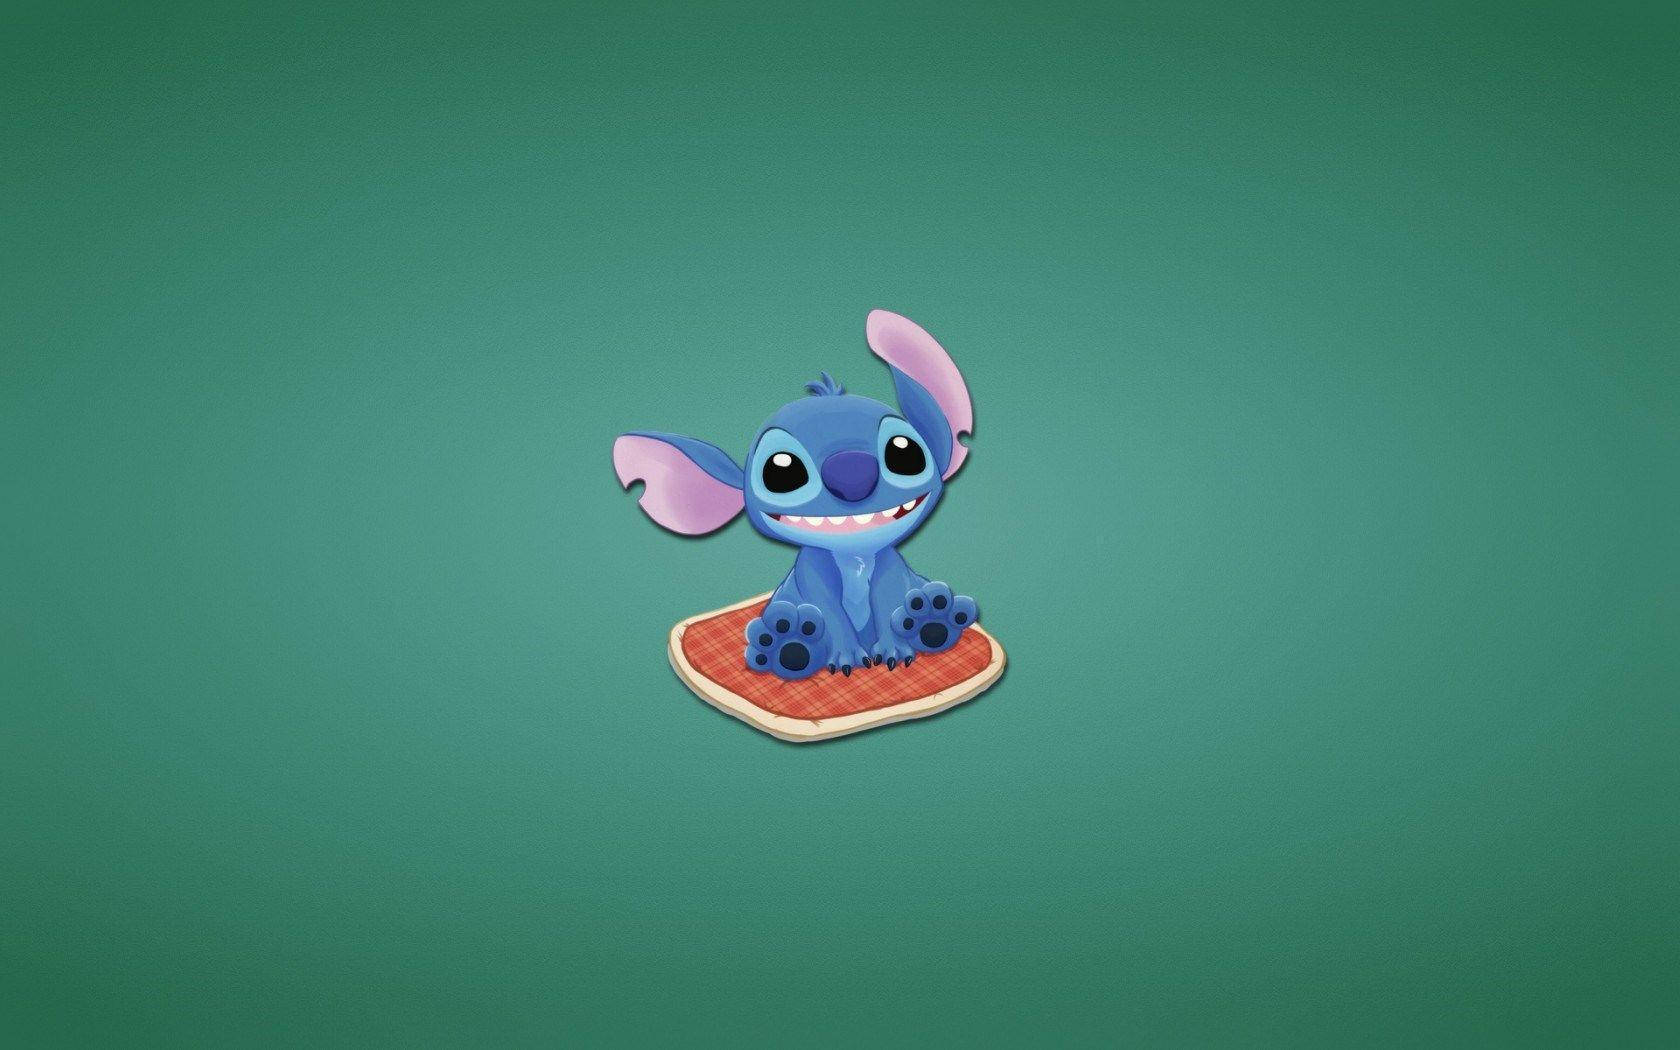 Stitch 3d Style Drawing On Mat Wallpaper